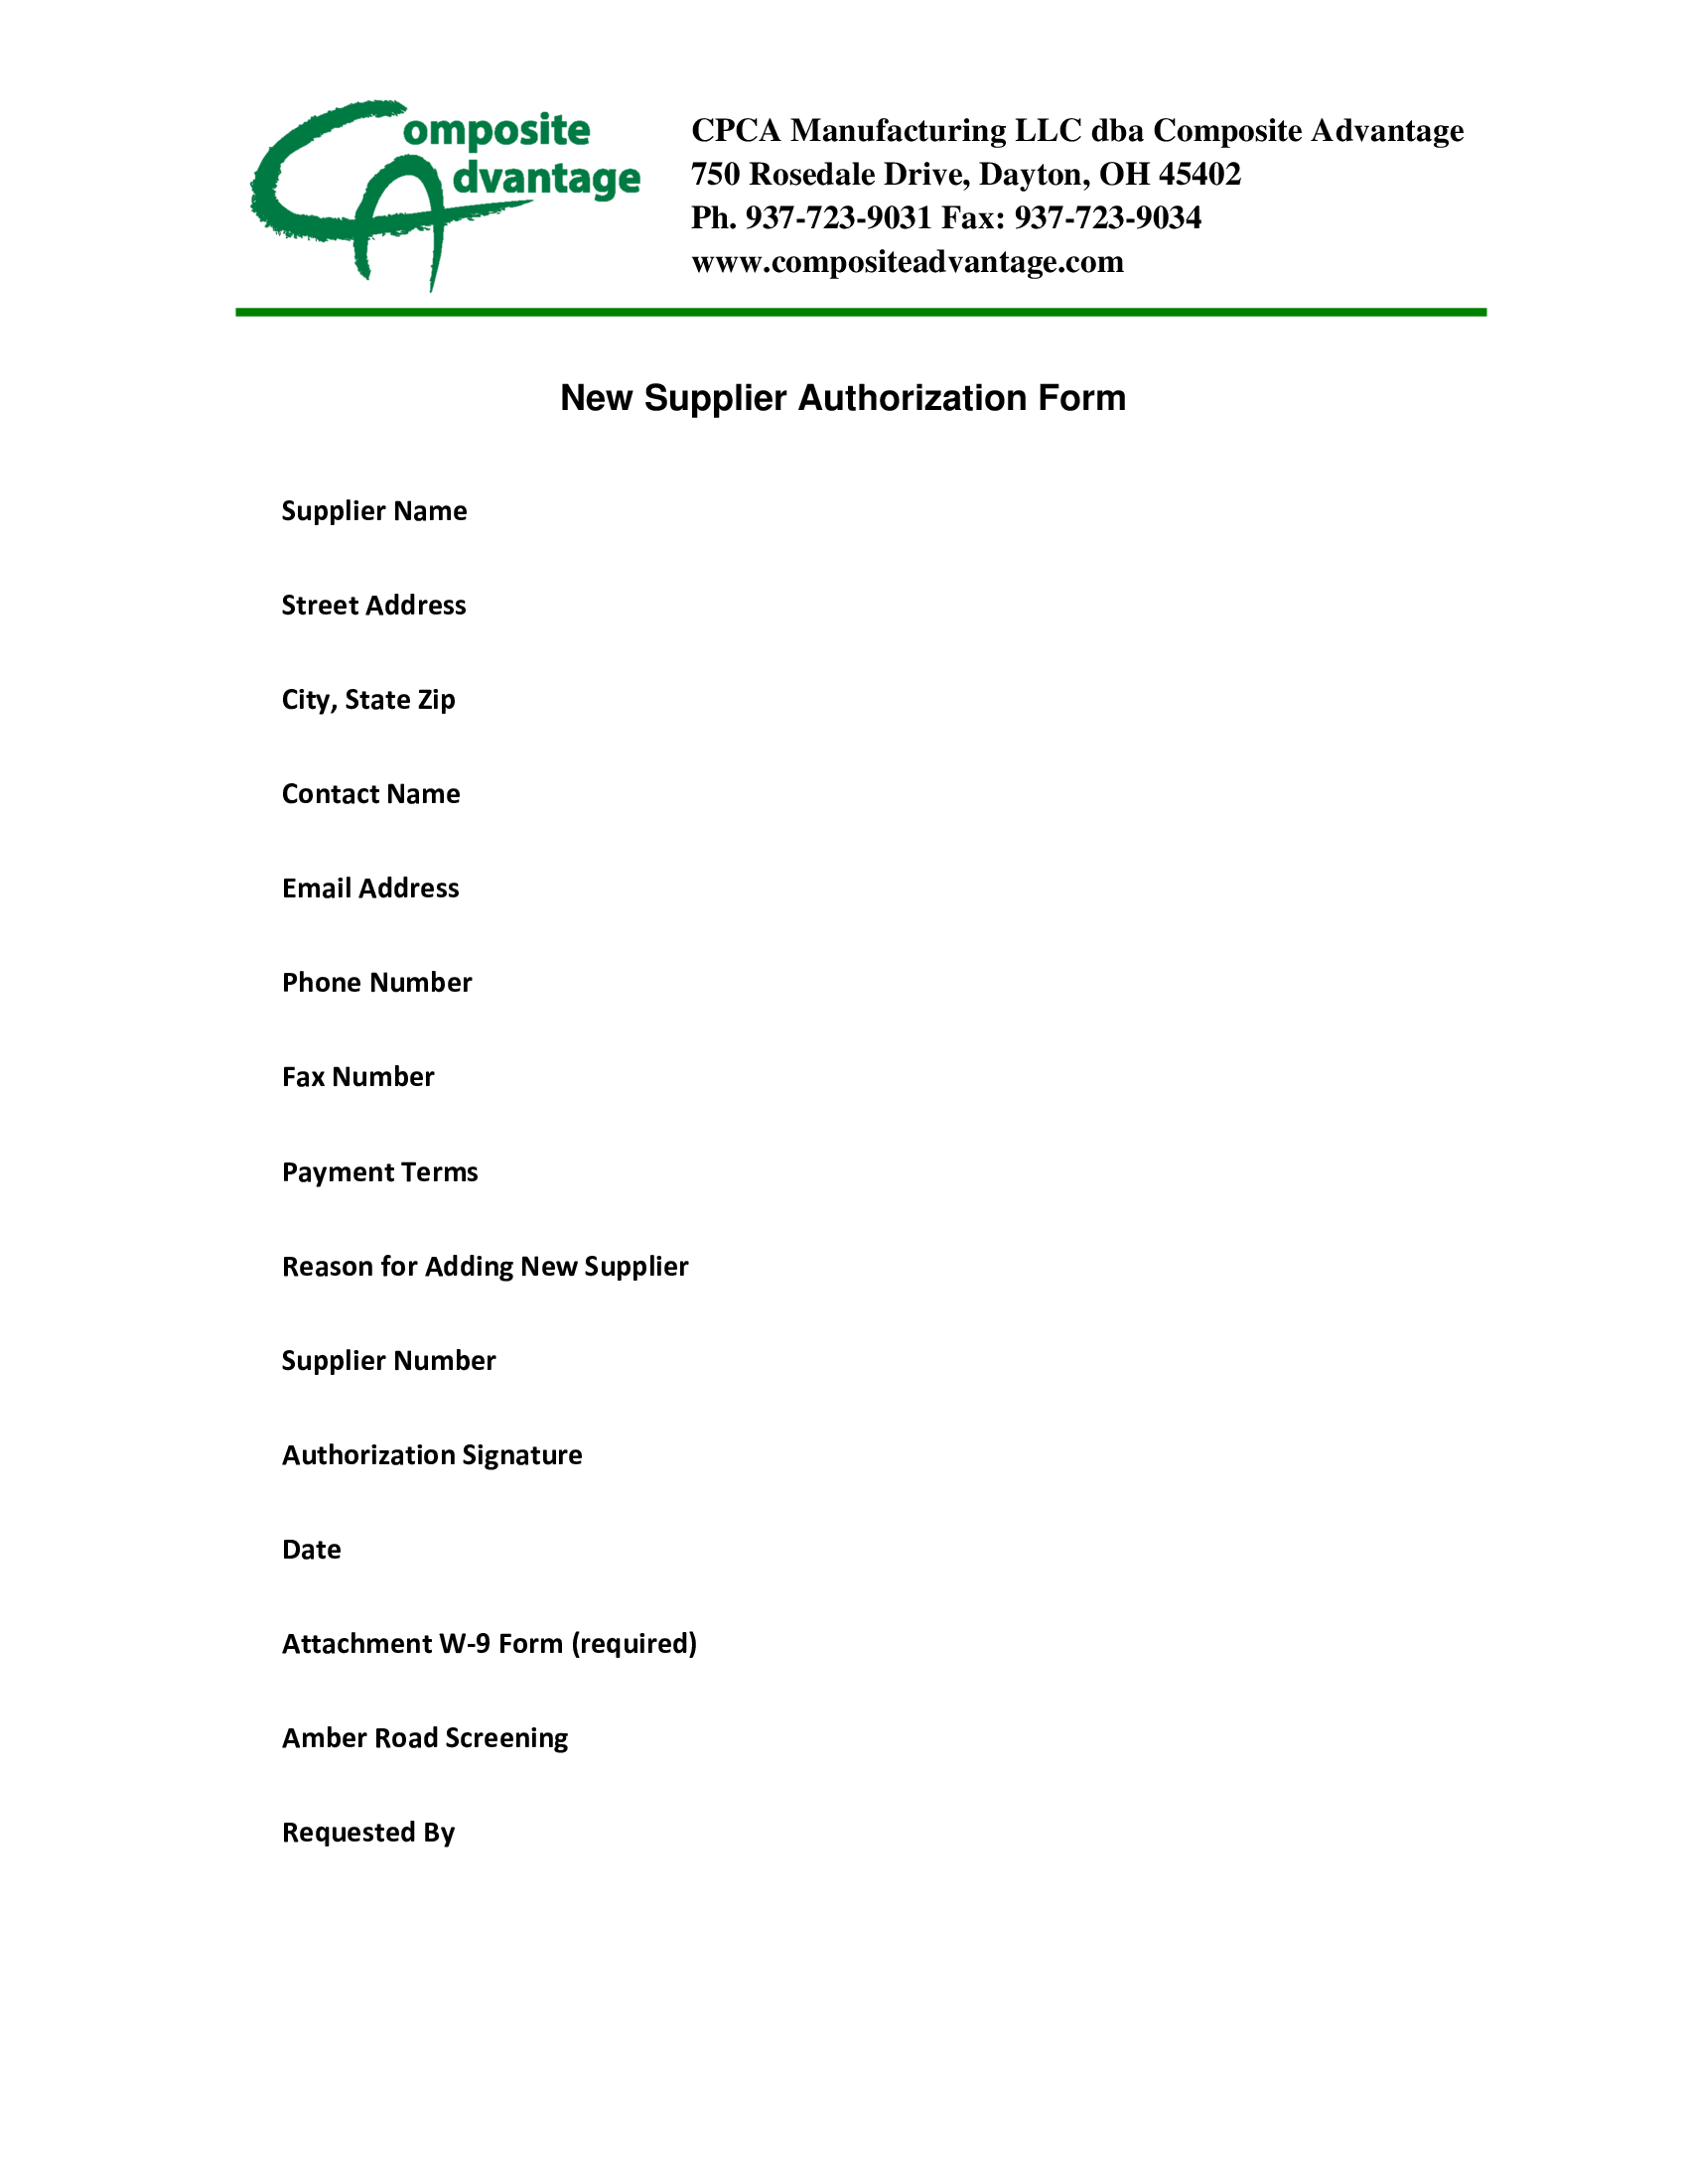 CPCA New Supplier Authorization Form